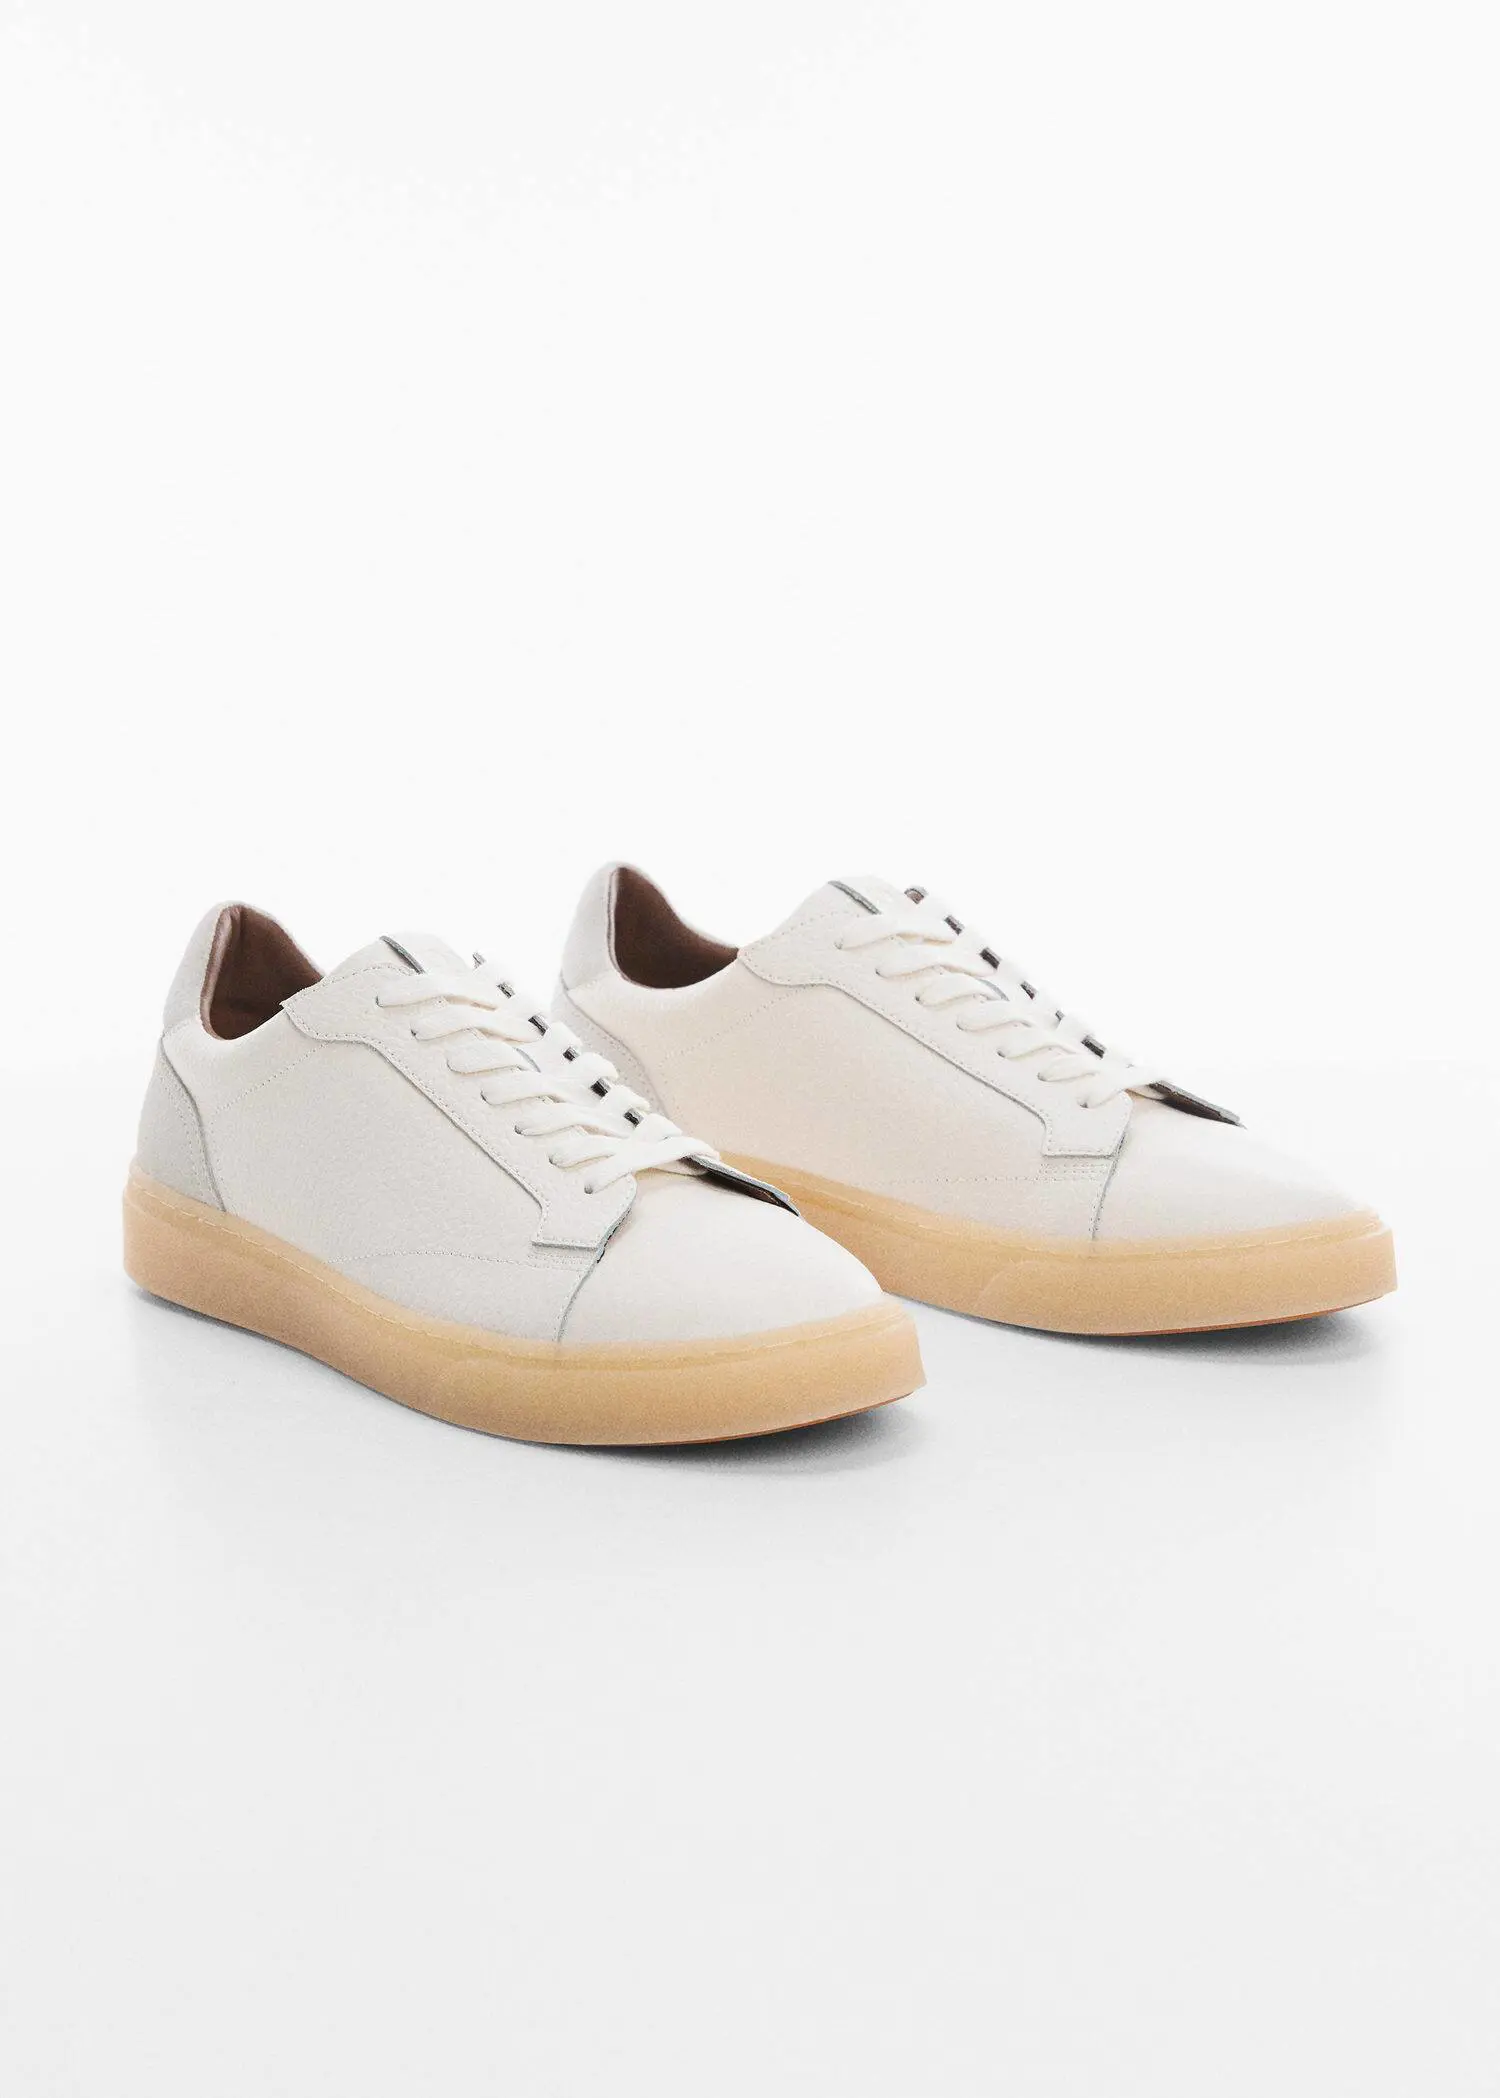 Mango Nappa leather trainers. a pair of white sneakers with a wooden sole. 